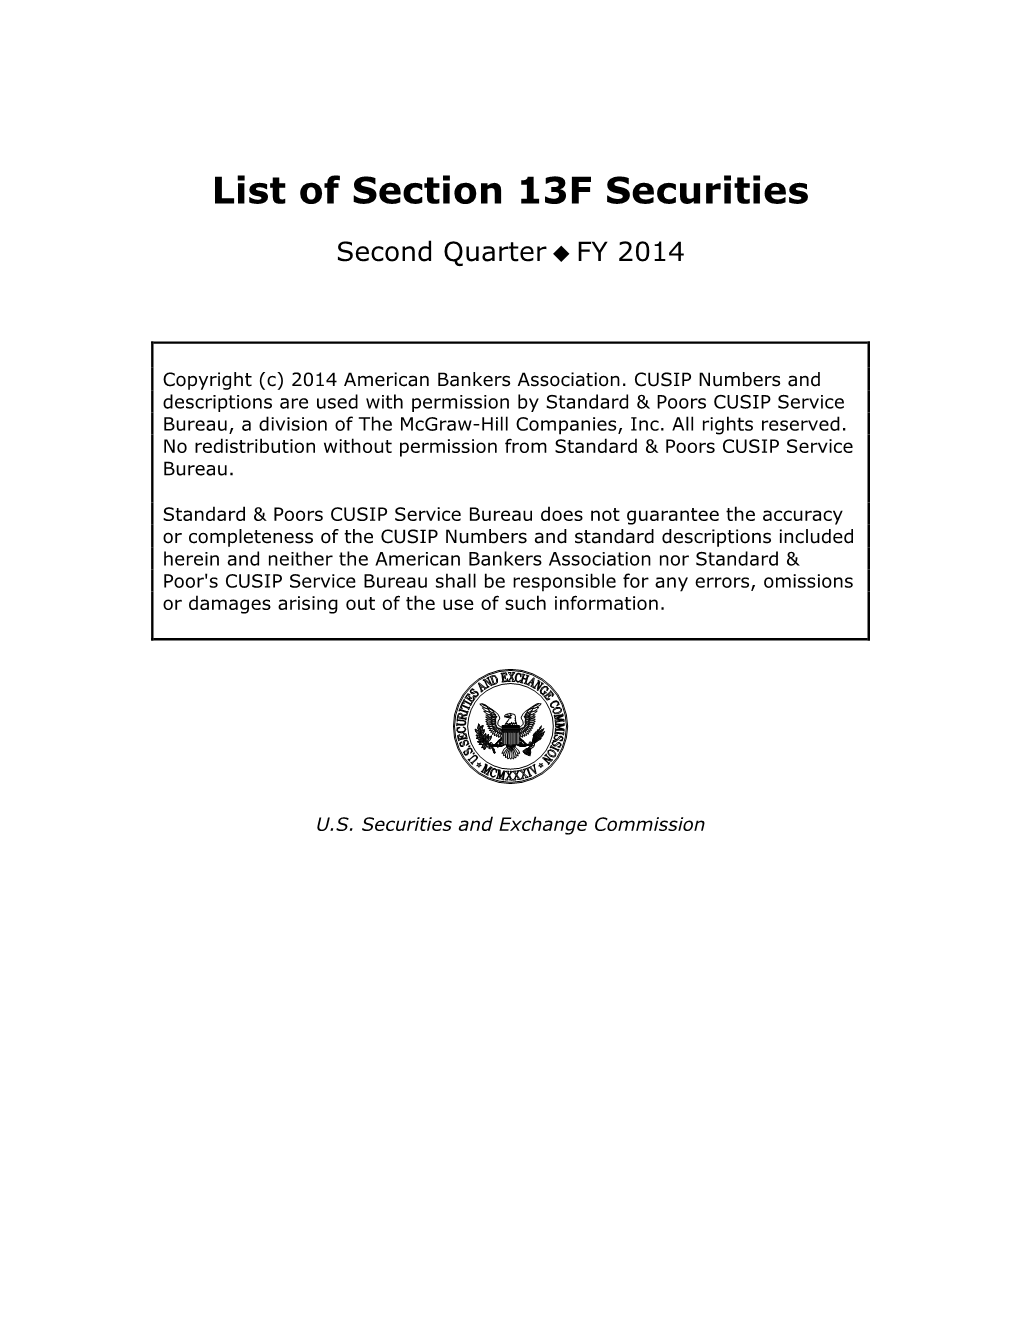 List of Section 13F Securities